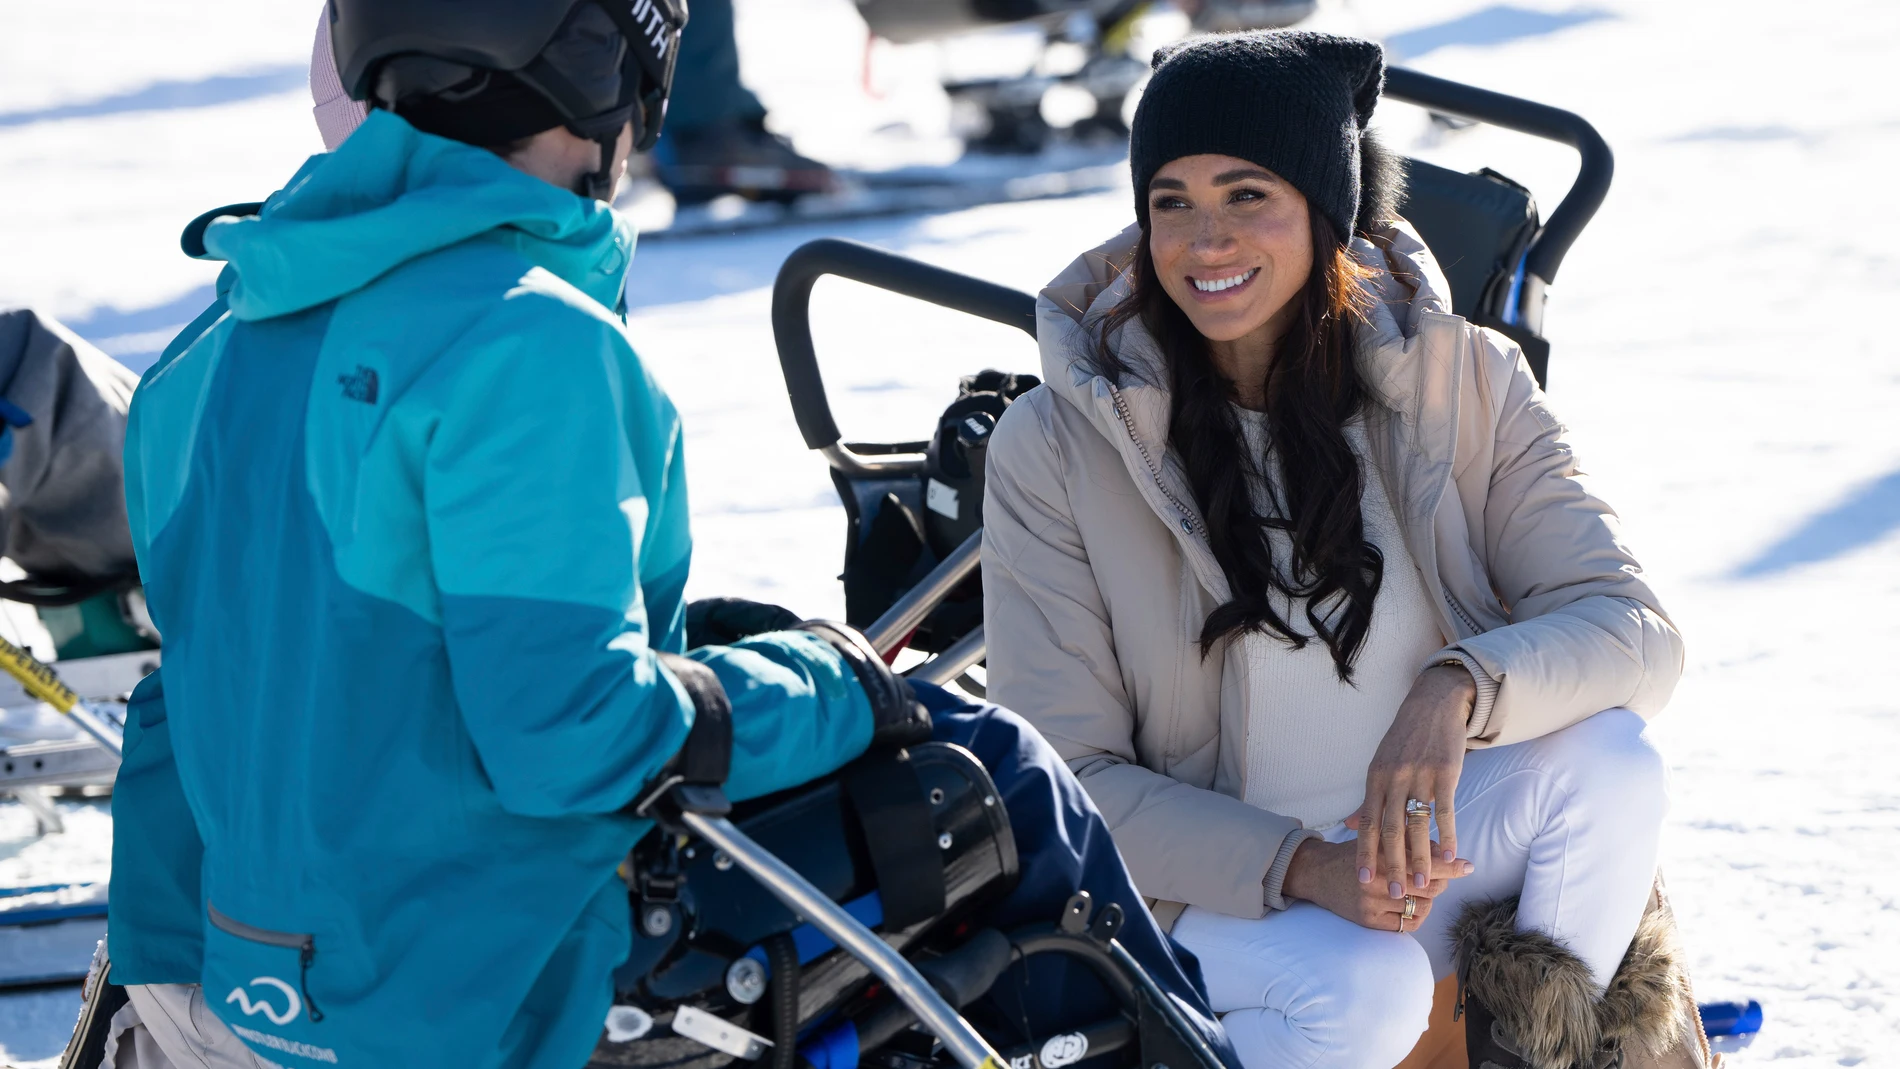 Meghan Markle, The Duchess of Sussex, meets with athletes during the Invictus Games training camp in Whistler, British Columbia, on Wednesday, Feb. 14, 2024. (Ethan Cairns/The Canadian Press via AP)